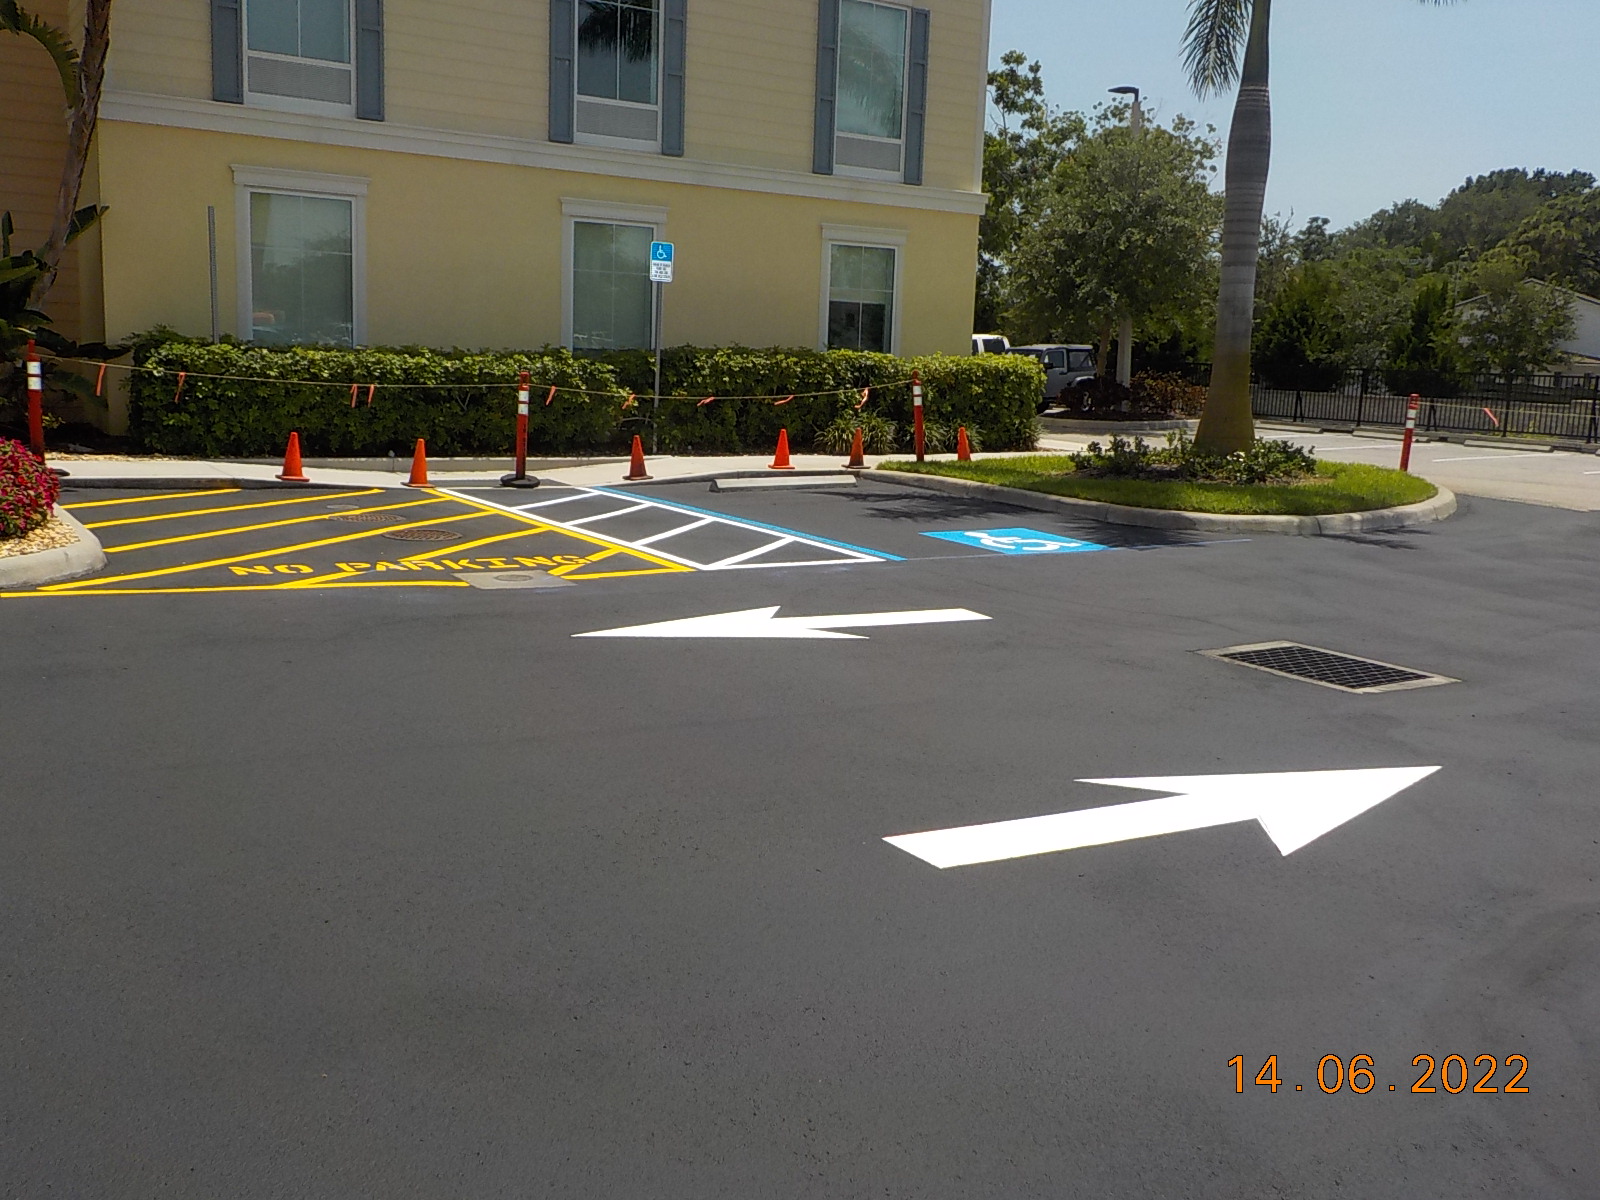 Home 2 Suites Nokomis Sealcoating and ReStriping